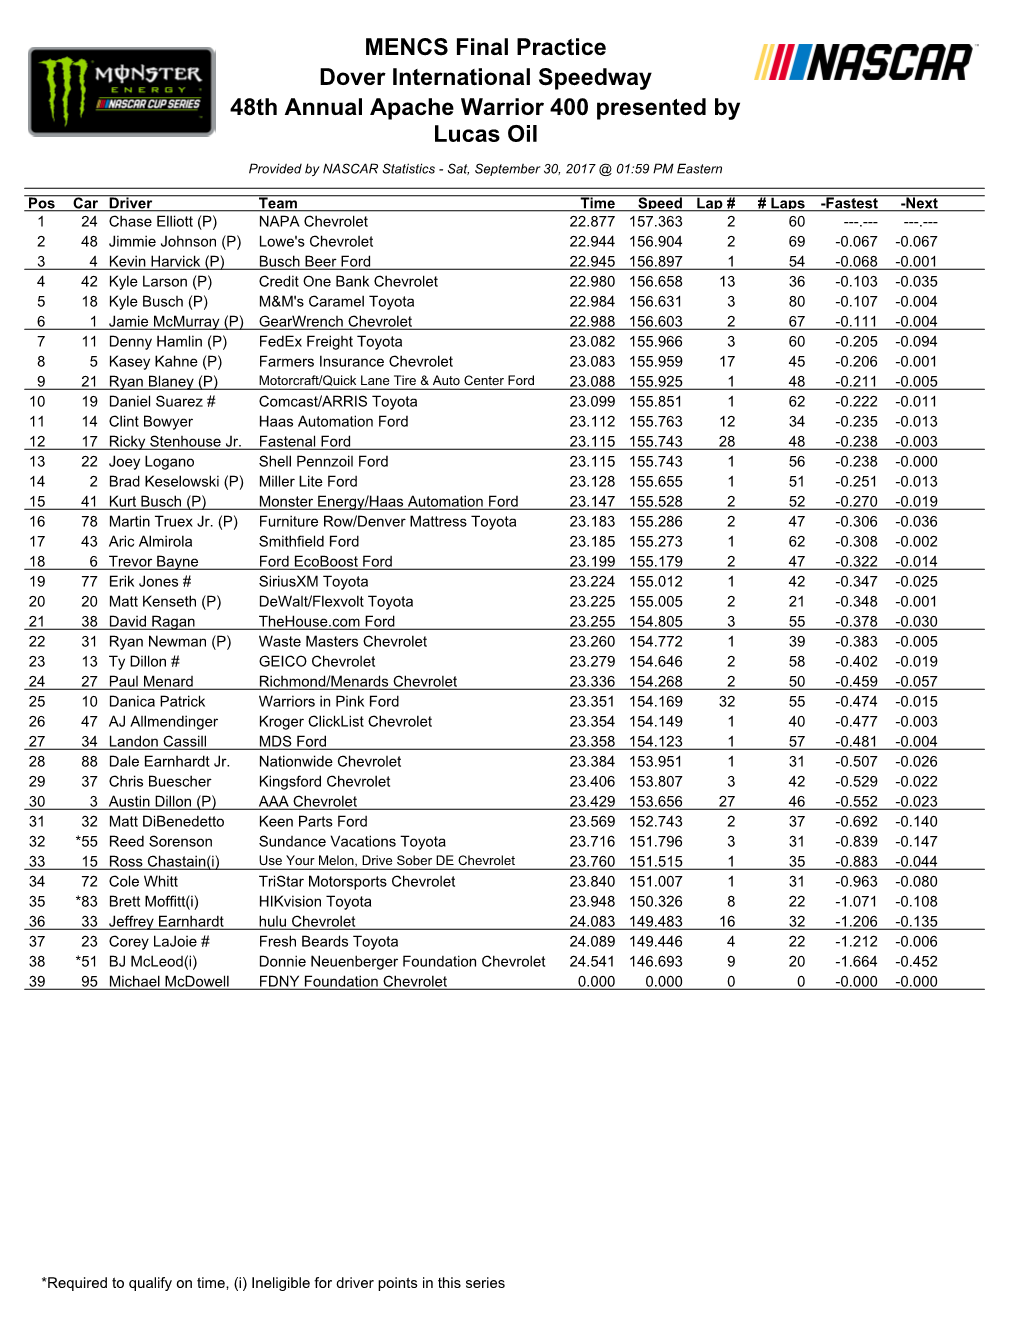 MENCS Final Practice Dover International Speedway 48Th Annual Apache Warrior 400 Presented by Lucas Oil